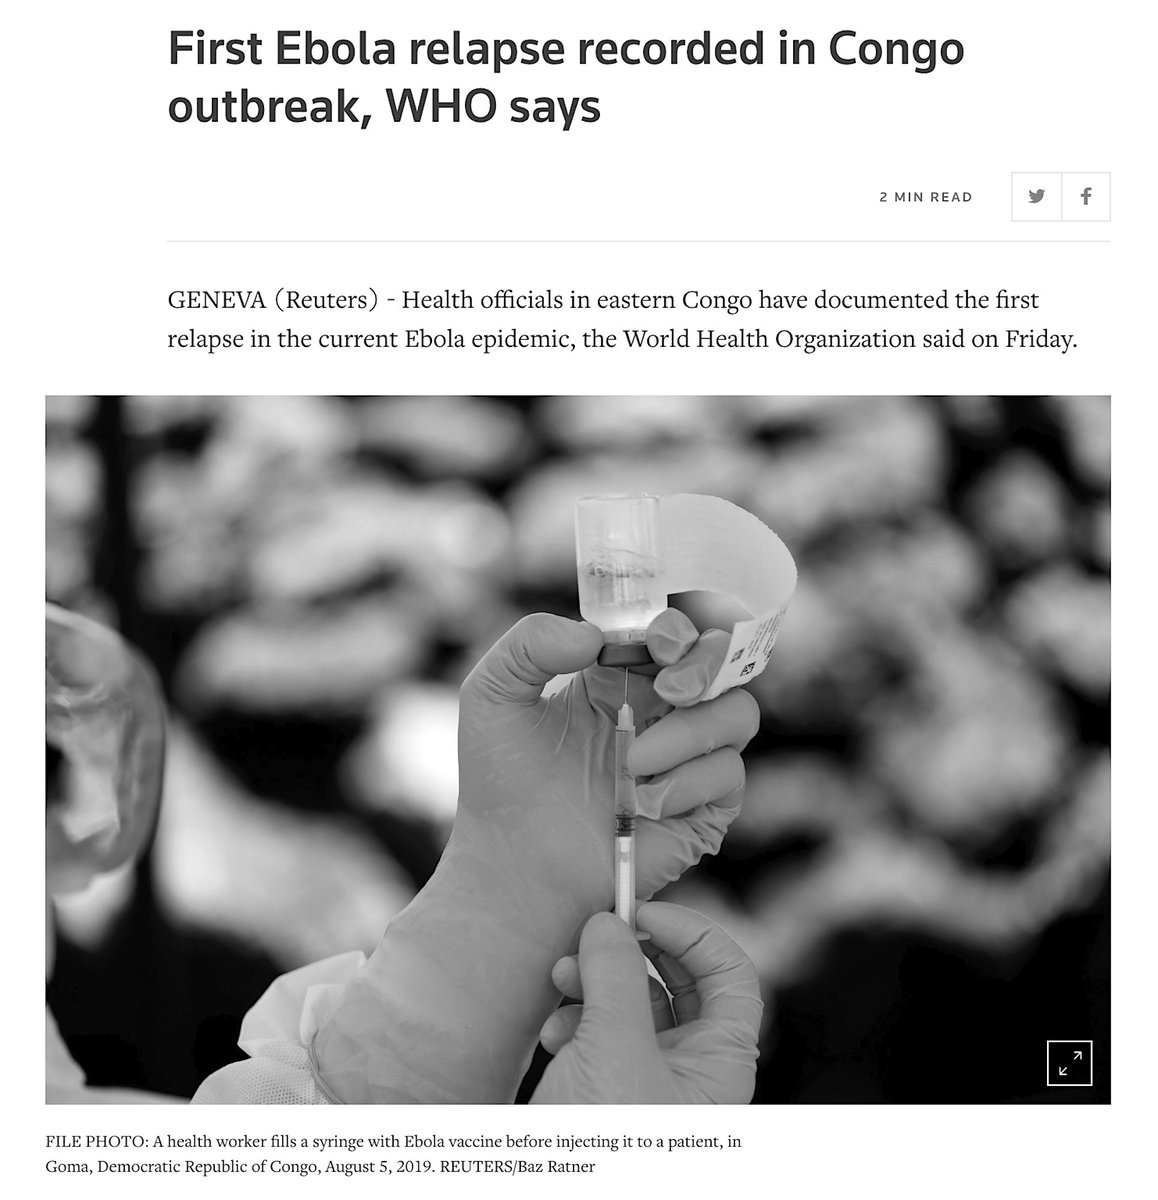 From Autism, Back To Ebola For A Moment.The Ebola Outbreak In Congo Has Infected More Than 3,300 People, And Killed More Than 2,200 Since Mid 2018, Making It The Second-Worst Outbreak On Record.Reuters, December 20, 2019 https://www.reuters.com/article/us-health-ebola-congo/first-ebola-relapse-recorded-in-congo-outbreak-who-says-idUSKBN1YO1CQ